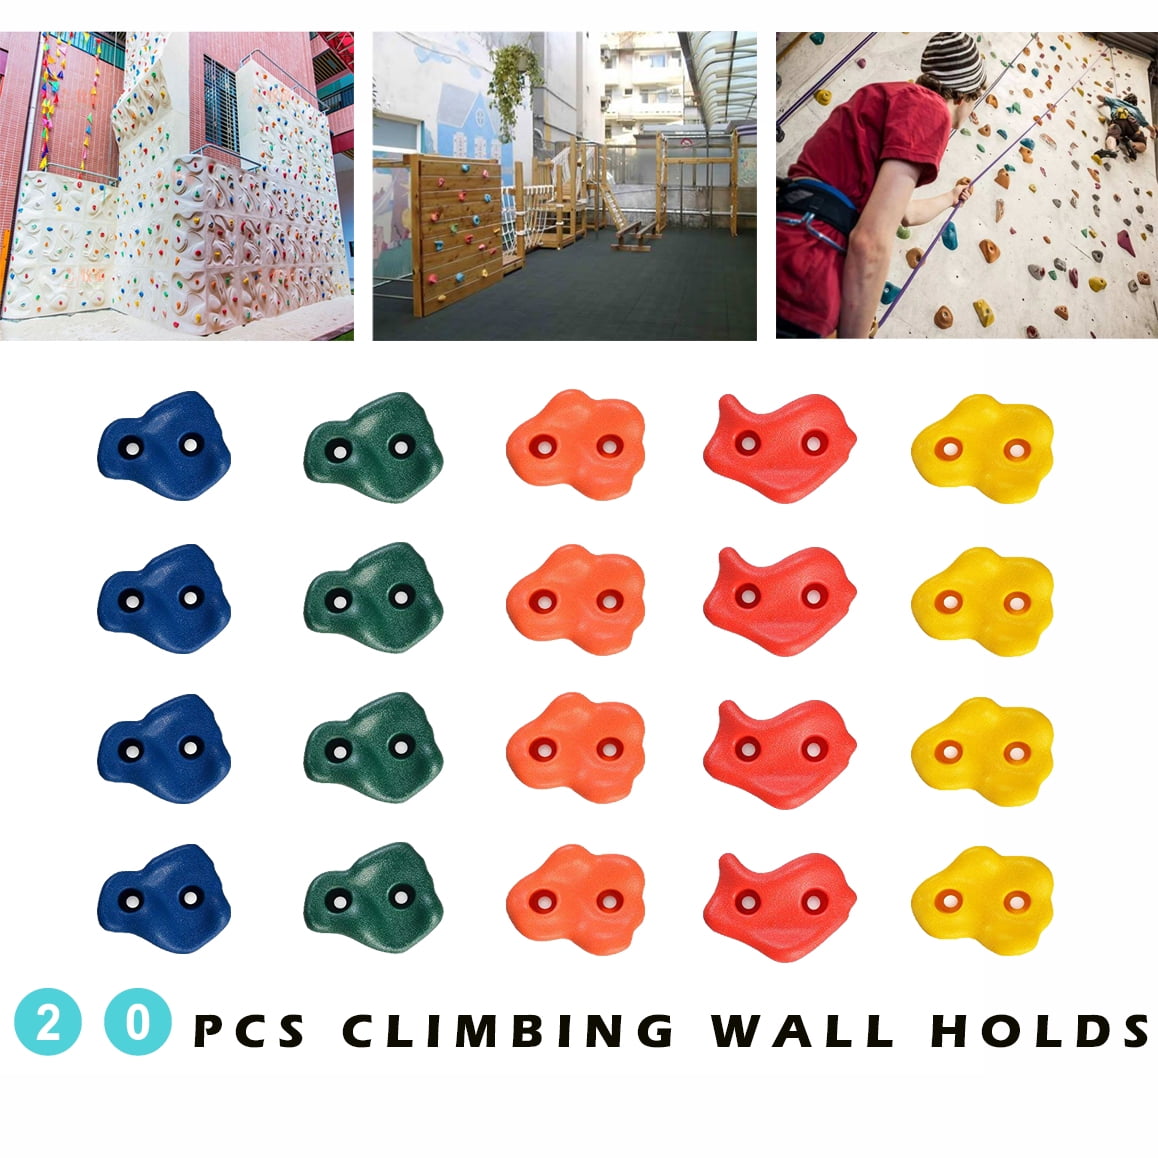 10 Pieces Climbing Holds Children Set,Climbing Grips For Outdoor Indoor Climbing Stones For Climbing Wall,Kids Boulders Colorful For Play Tower With 10 Screws